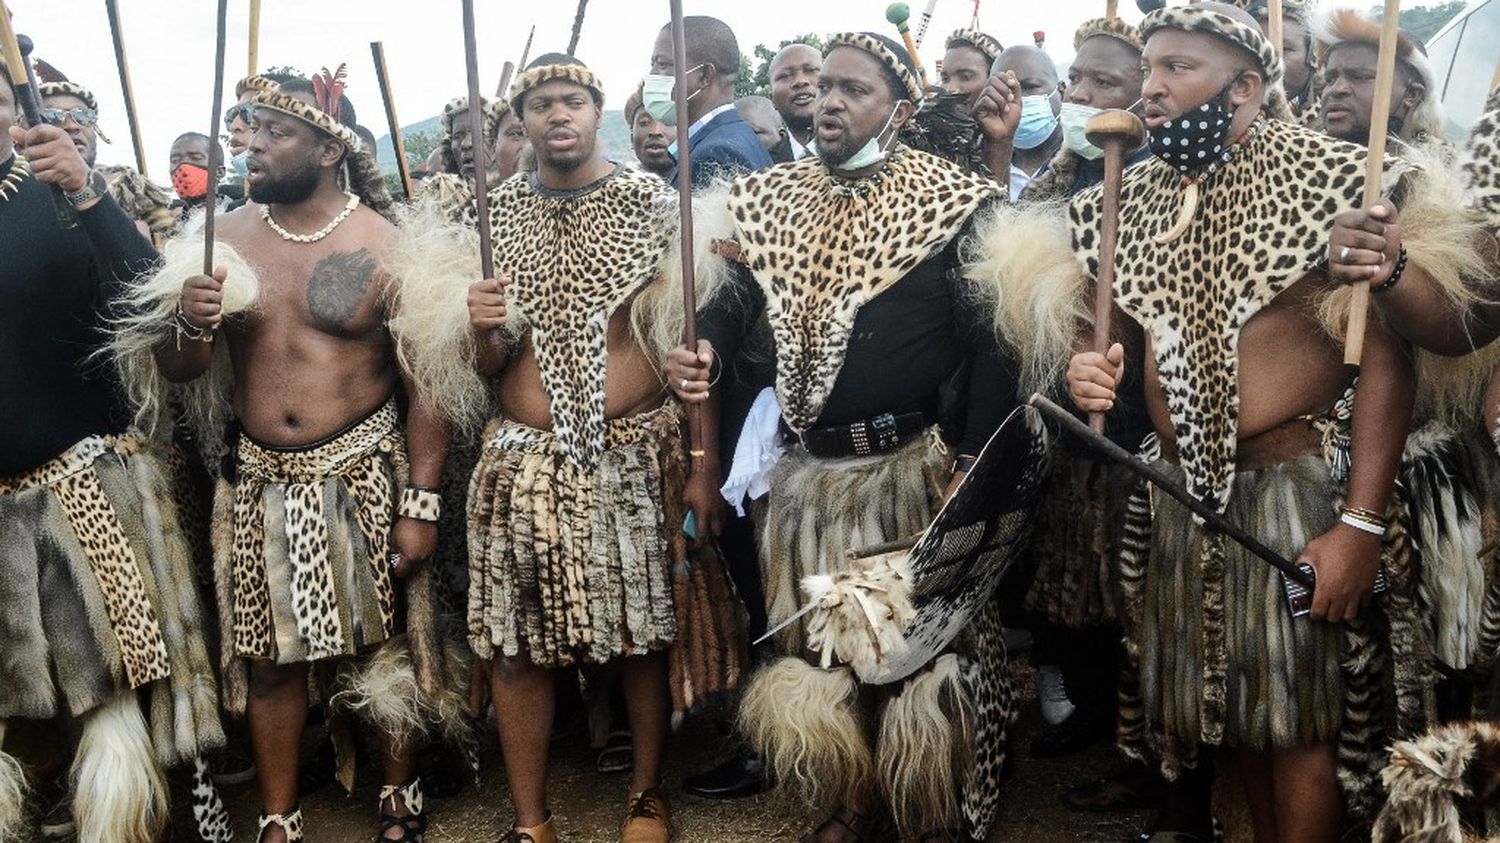 South Africa: Zulu people crown controversial king
